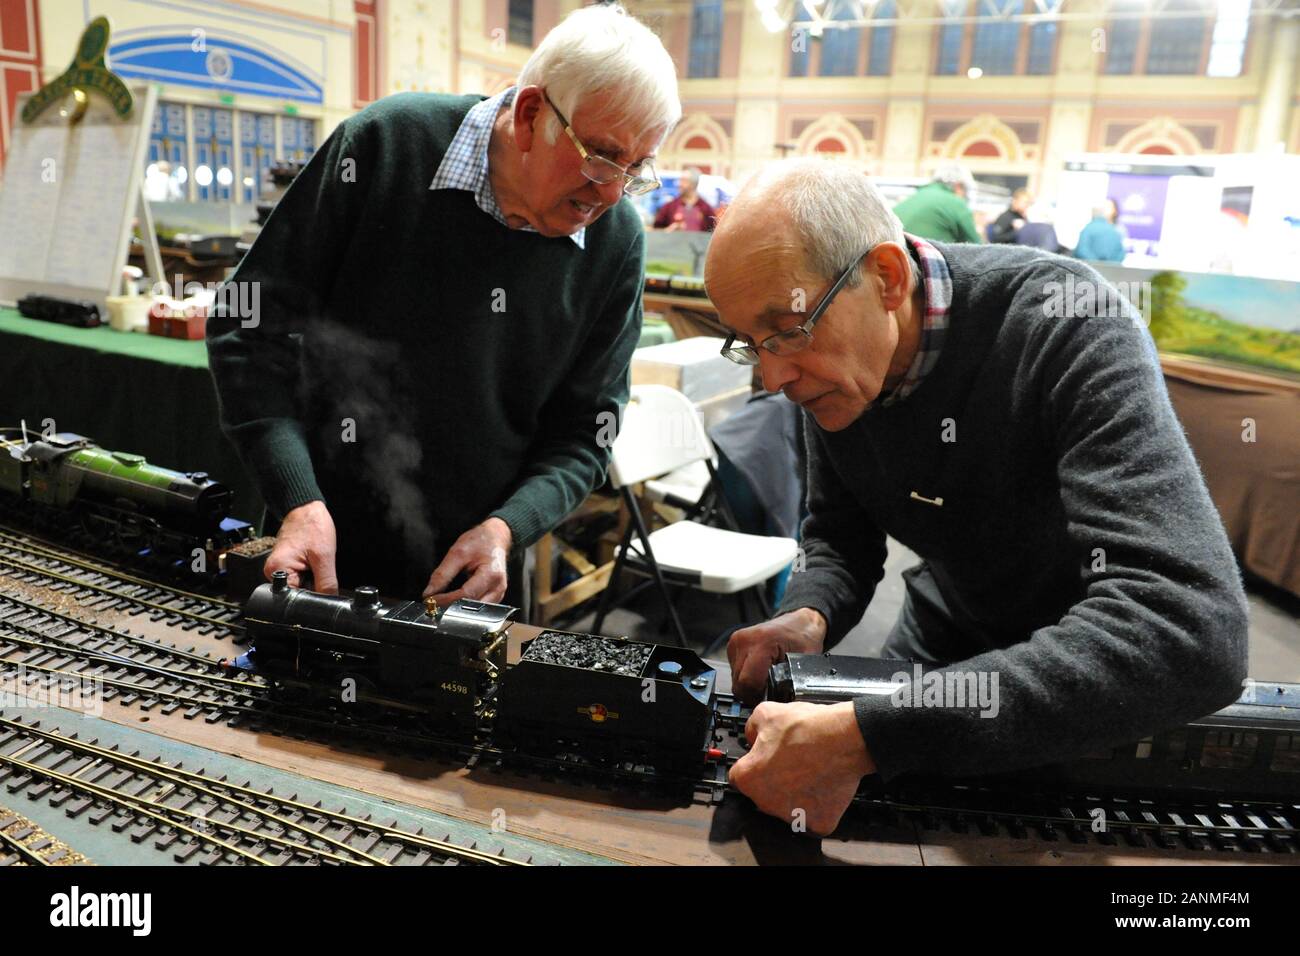 Enthusiasts preparing a 16mm narrow gauge train at the London Model Engineering Exhibition which opened today at Alexandra Palace, London.  The show is one of the largest modelling exhibitions in the UK, blending the full spectrum of model creation from traditional model engineering, steam locomotives and traction engines through to more modern gadgets and ‘boys toys’ including trucks, boats, aeroplanes and helicopters.  Over 45 national and regional modelling clubs and societies and associations will be displaying their member’s work and competing to win the prestigious Society Shield. In tot Stock Photo